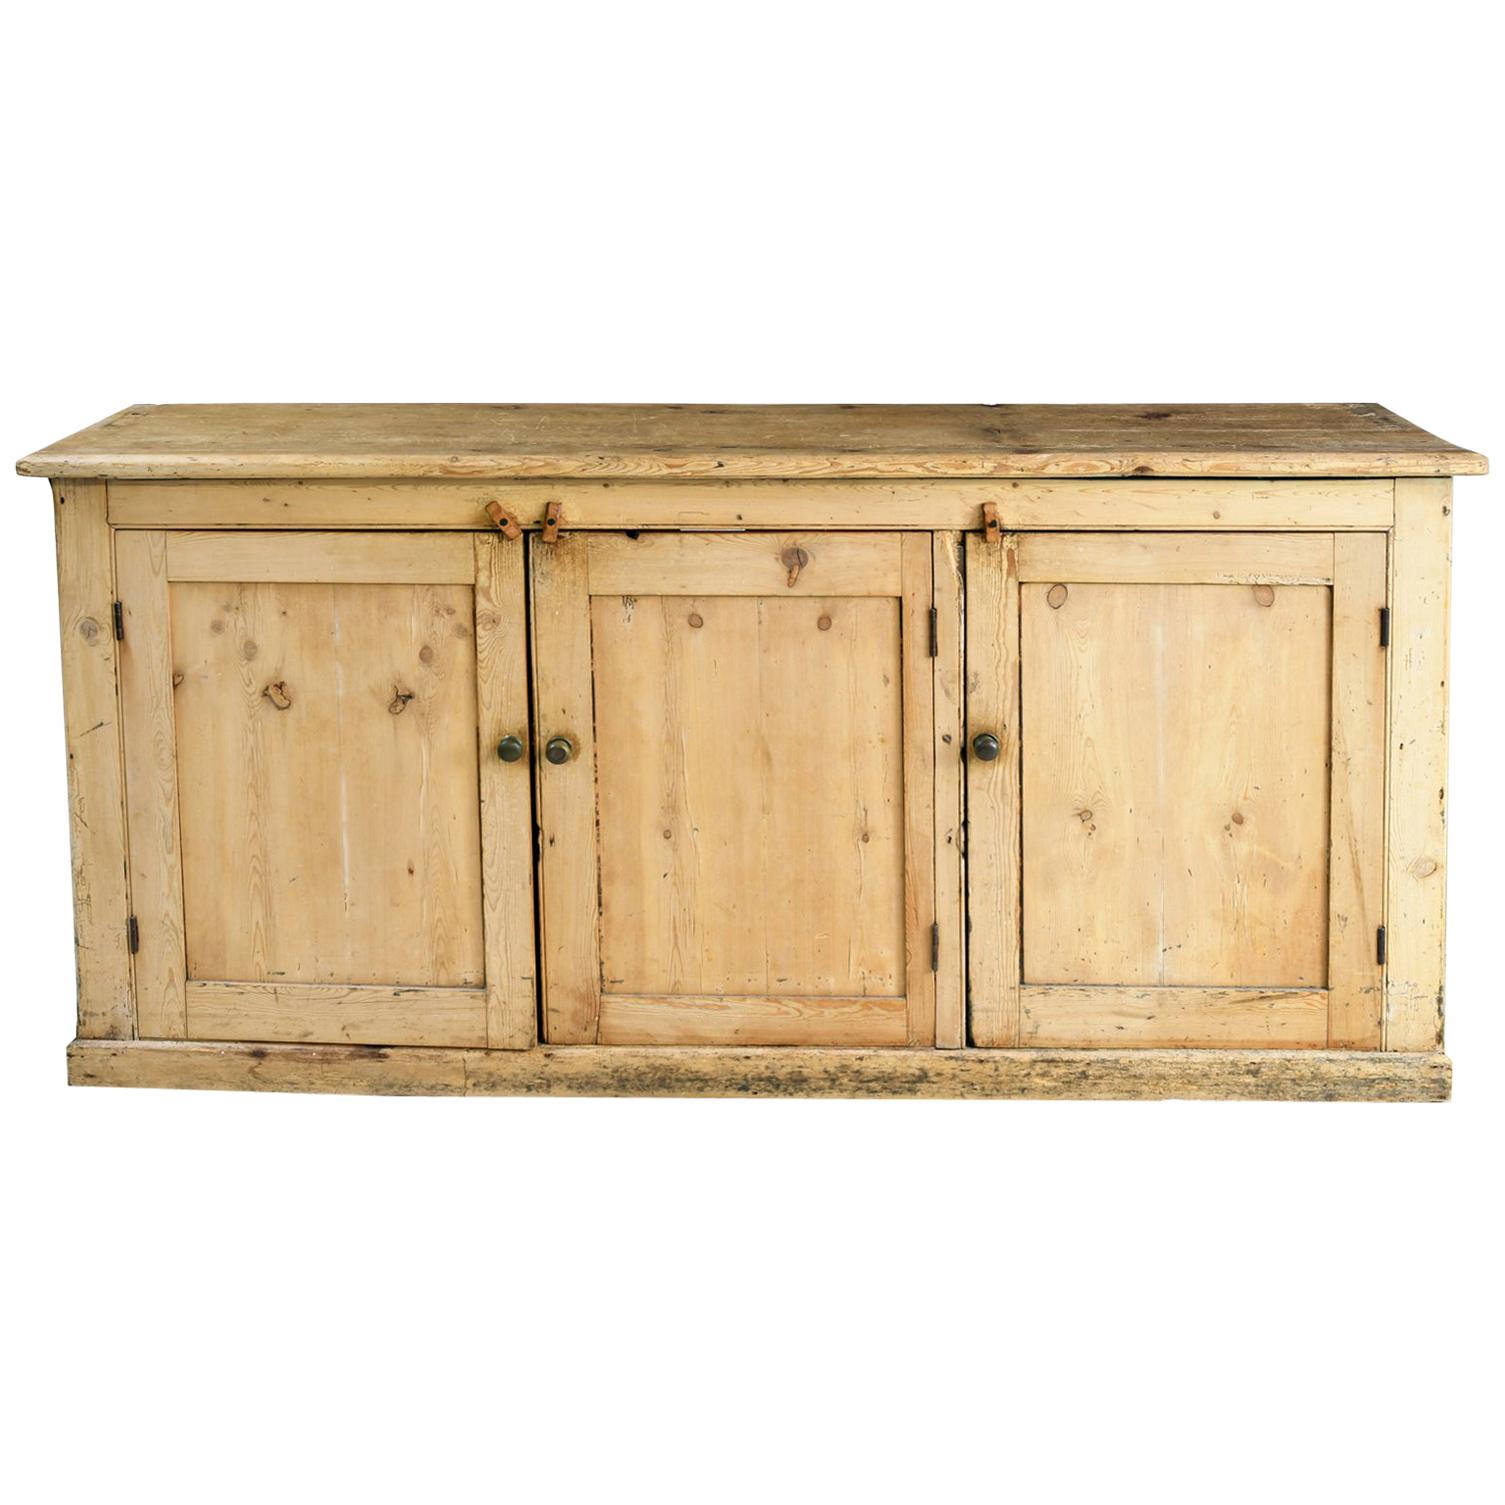 Light Pine Rustic Counter Console with 3 Doors and Interior Shelving, circa 1840